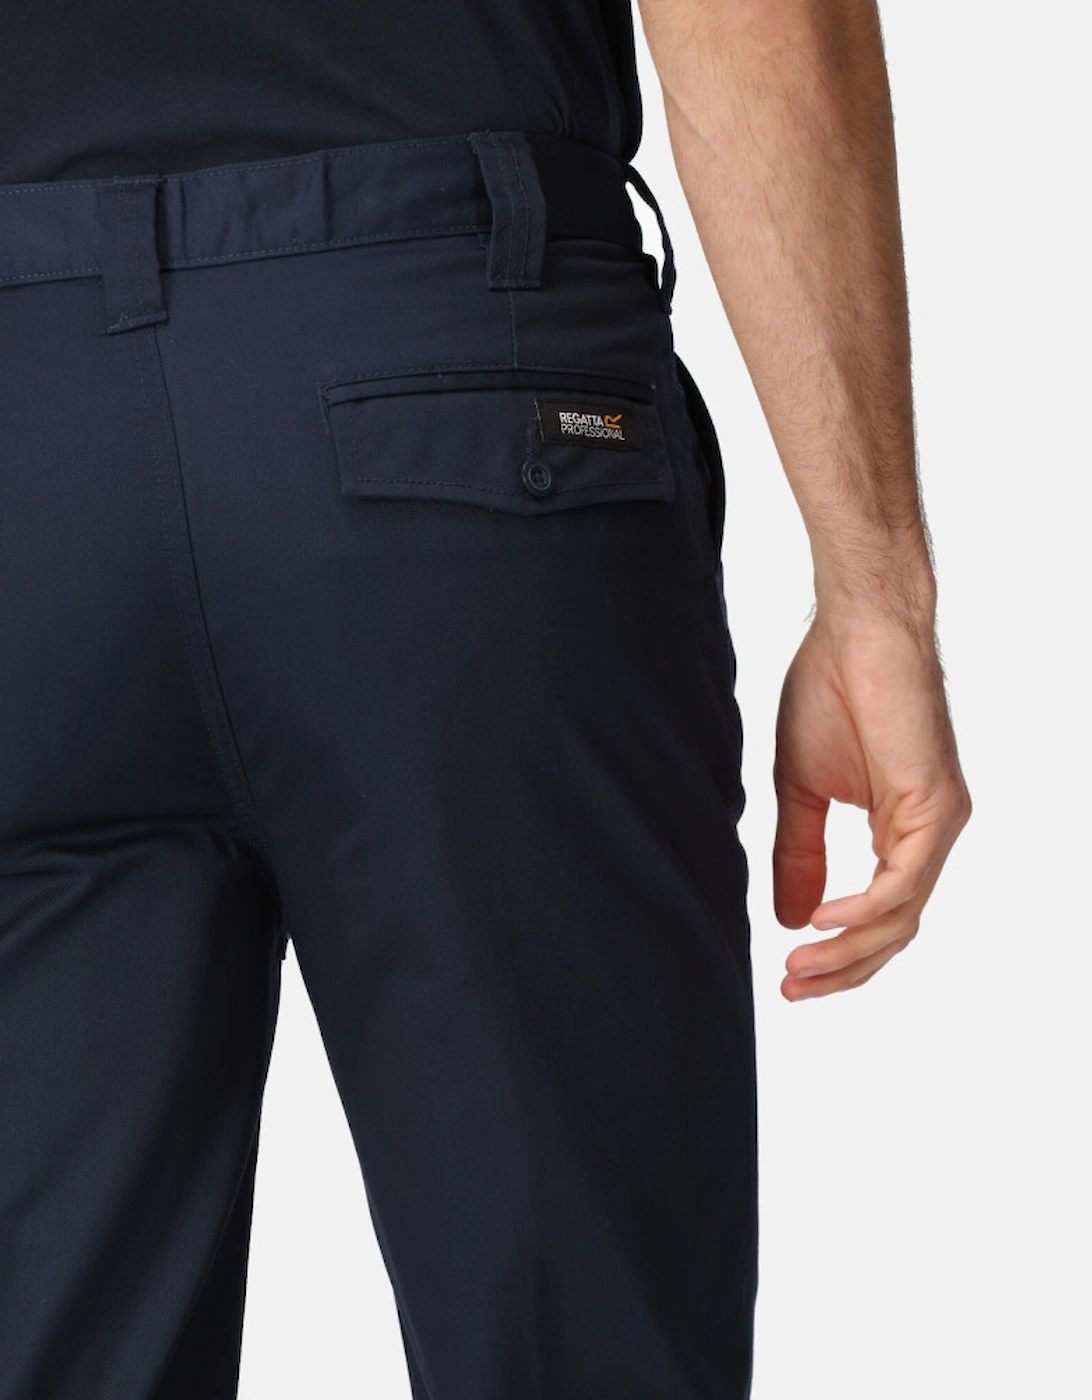 Professional Mens Combine Reinforced Work Trousers